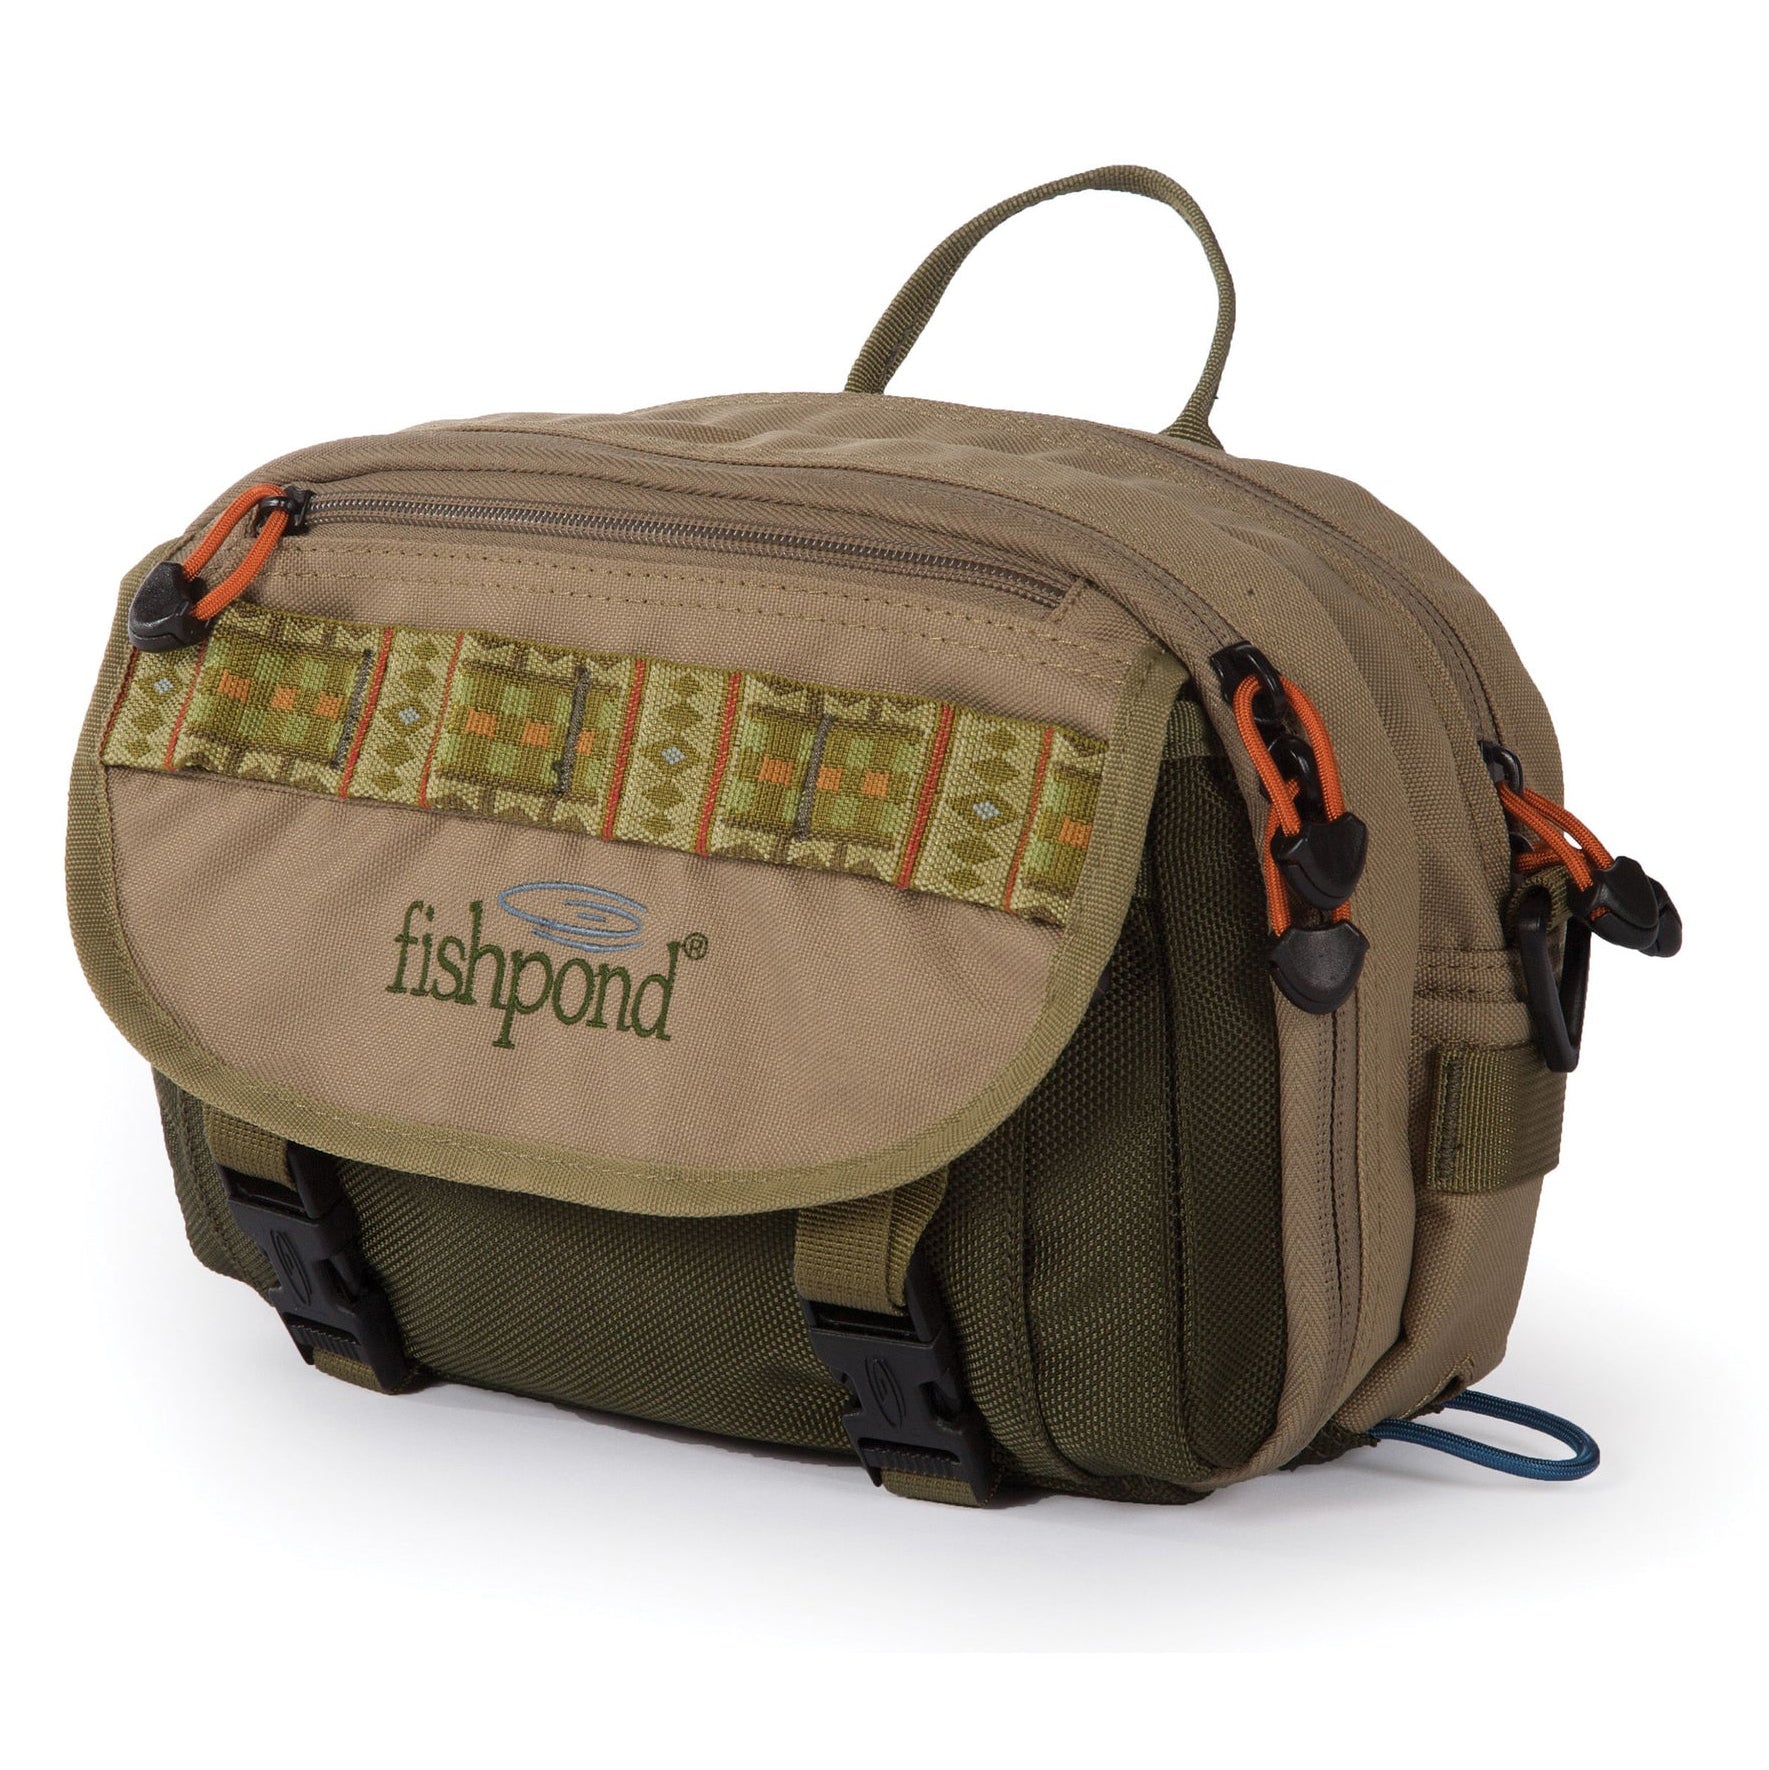 Fishpond Blue River Chest/Lumbar Pack – charliesflybox